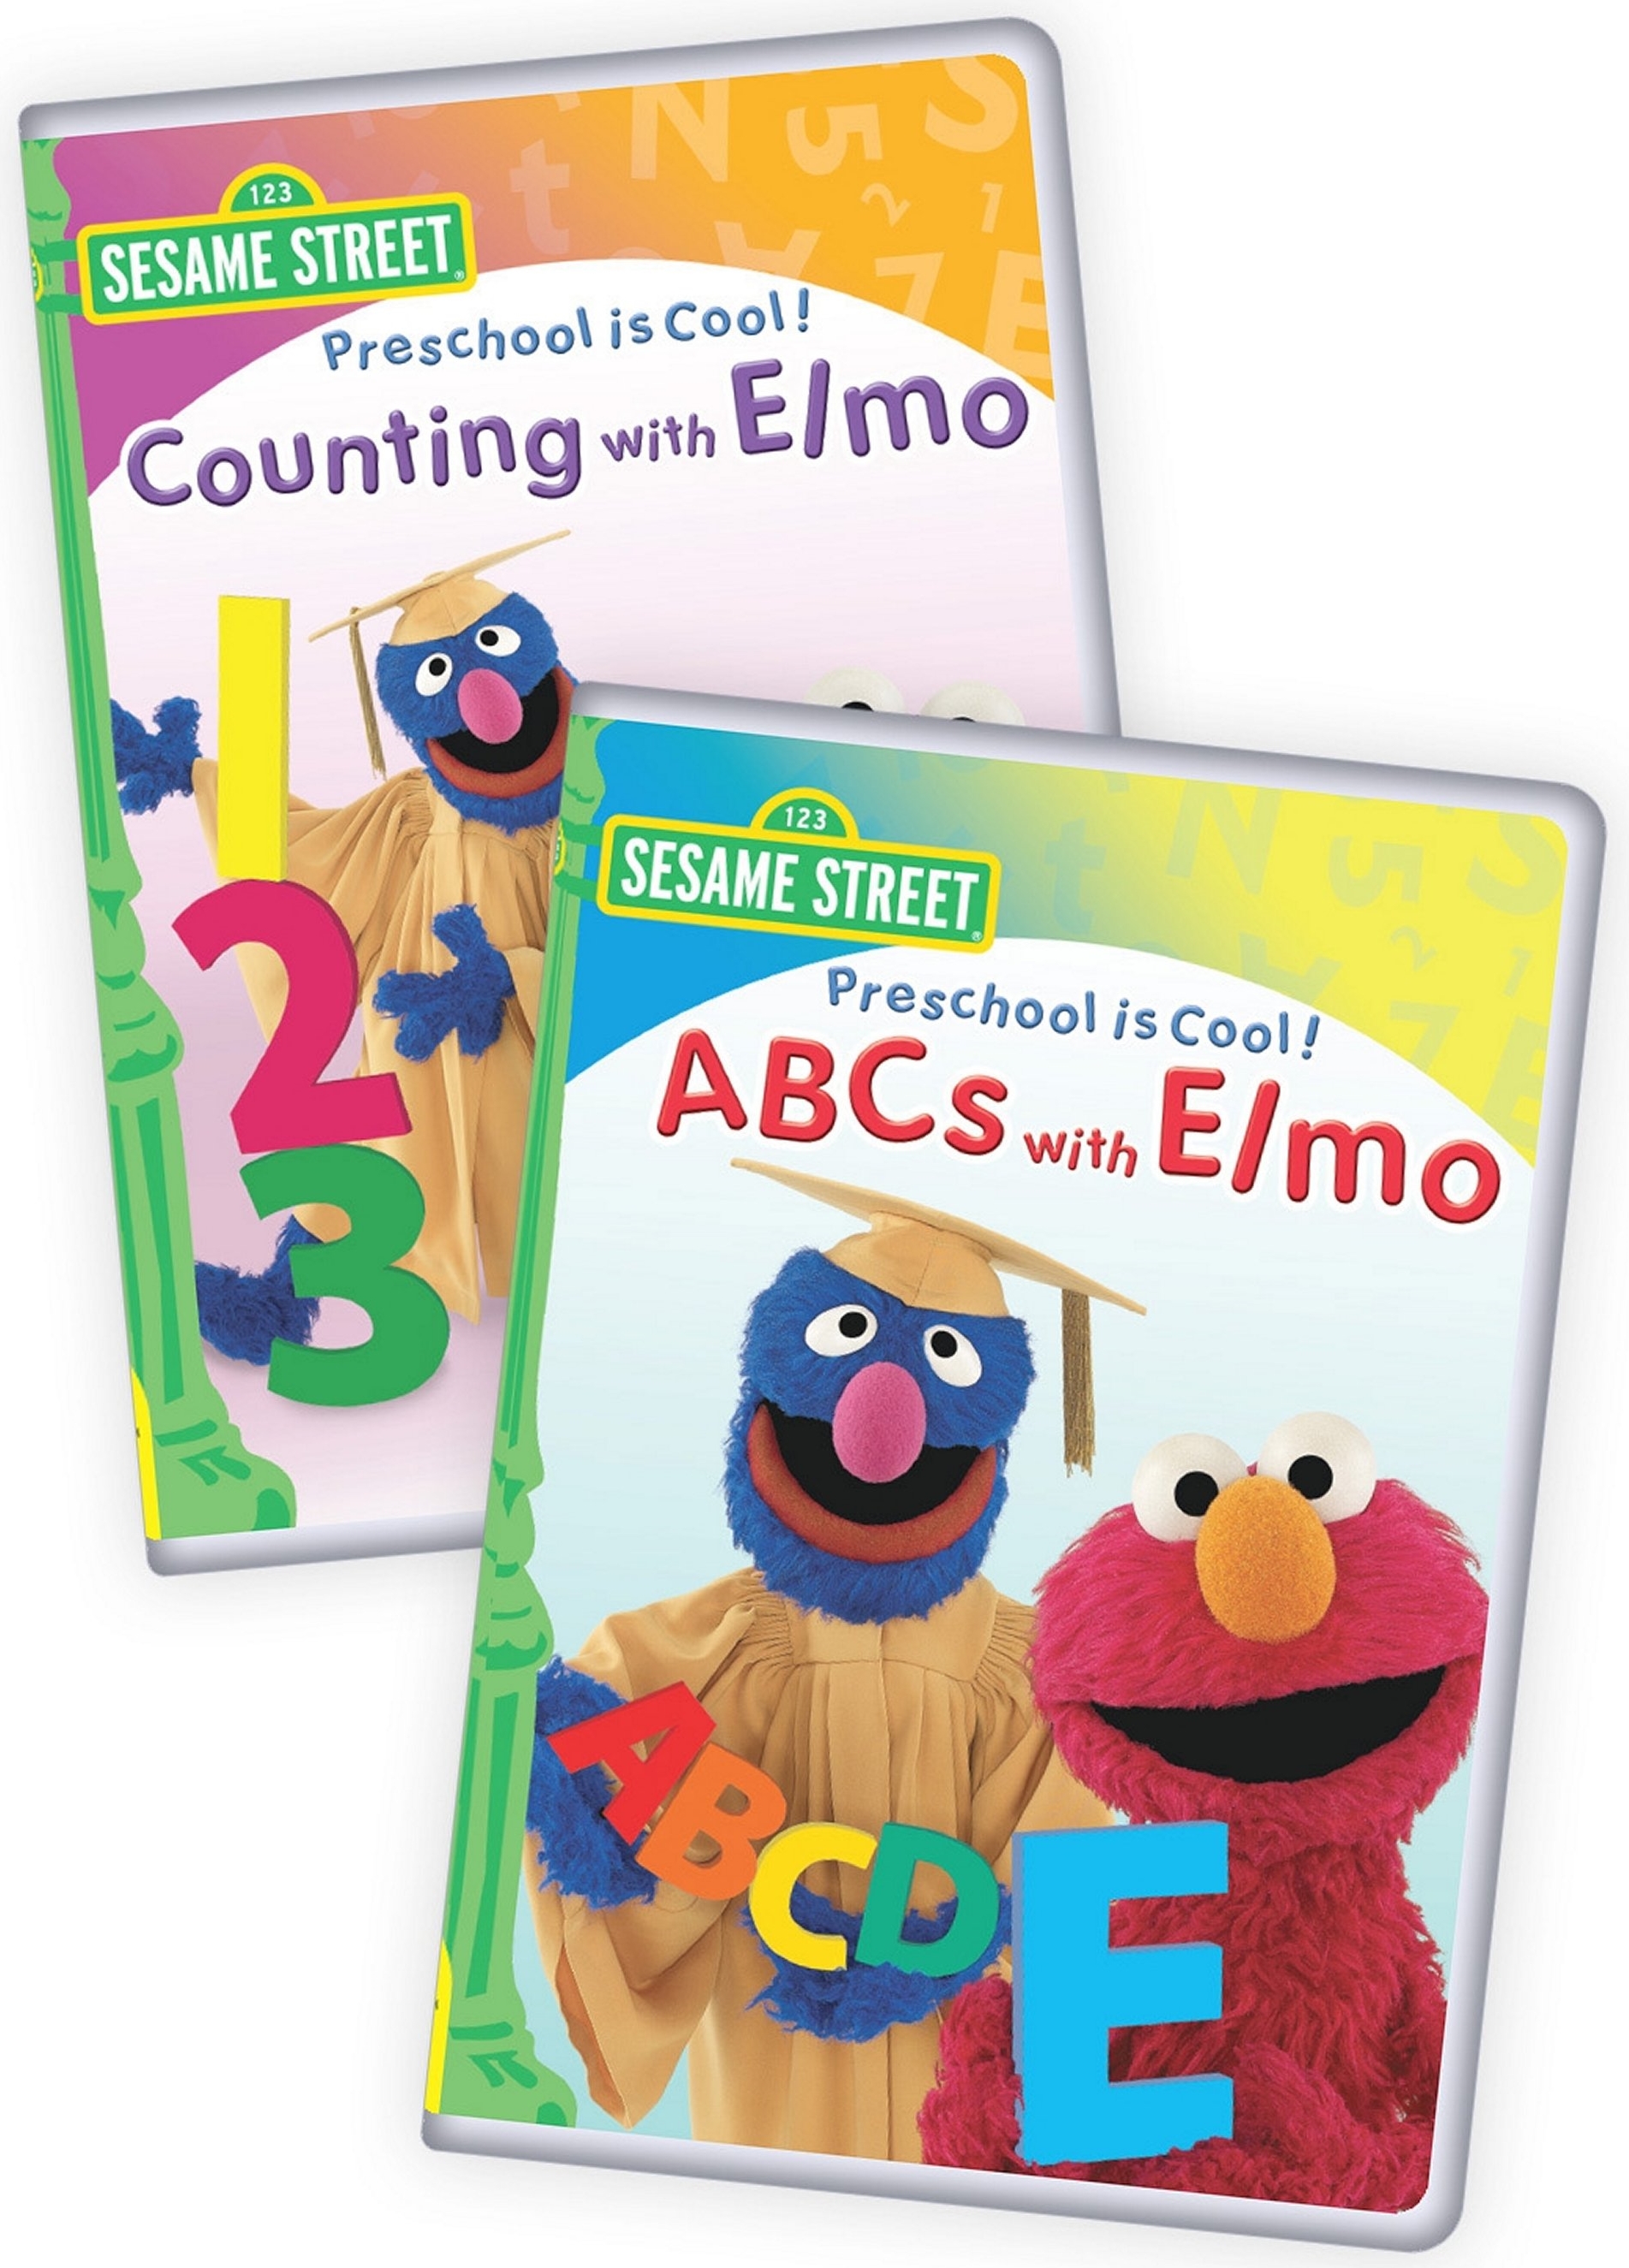 Sesame Street Preschool is Cool! ABCs with Elmo/Counting with Elmo